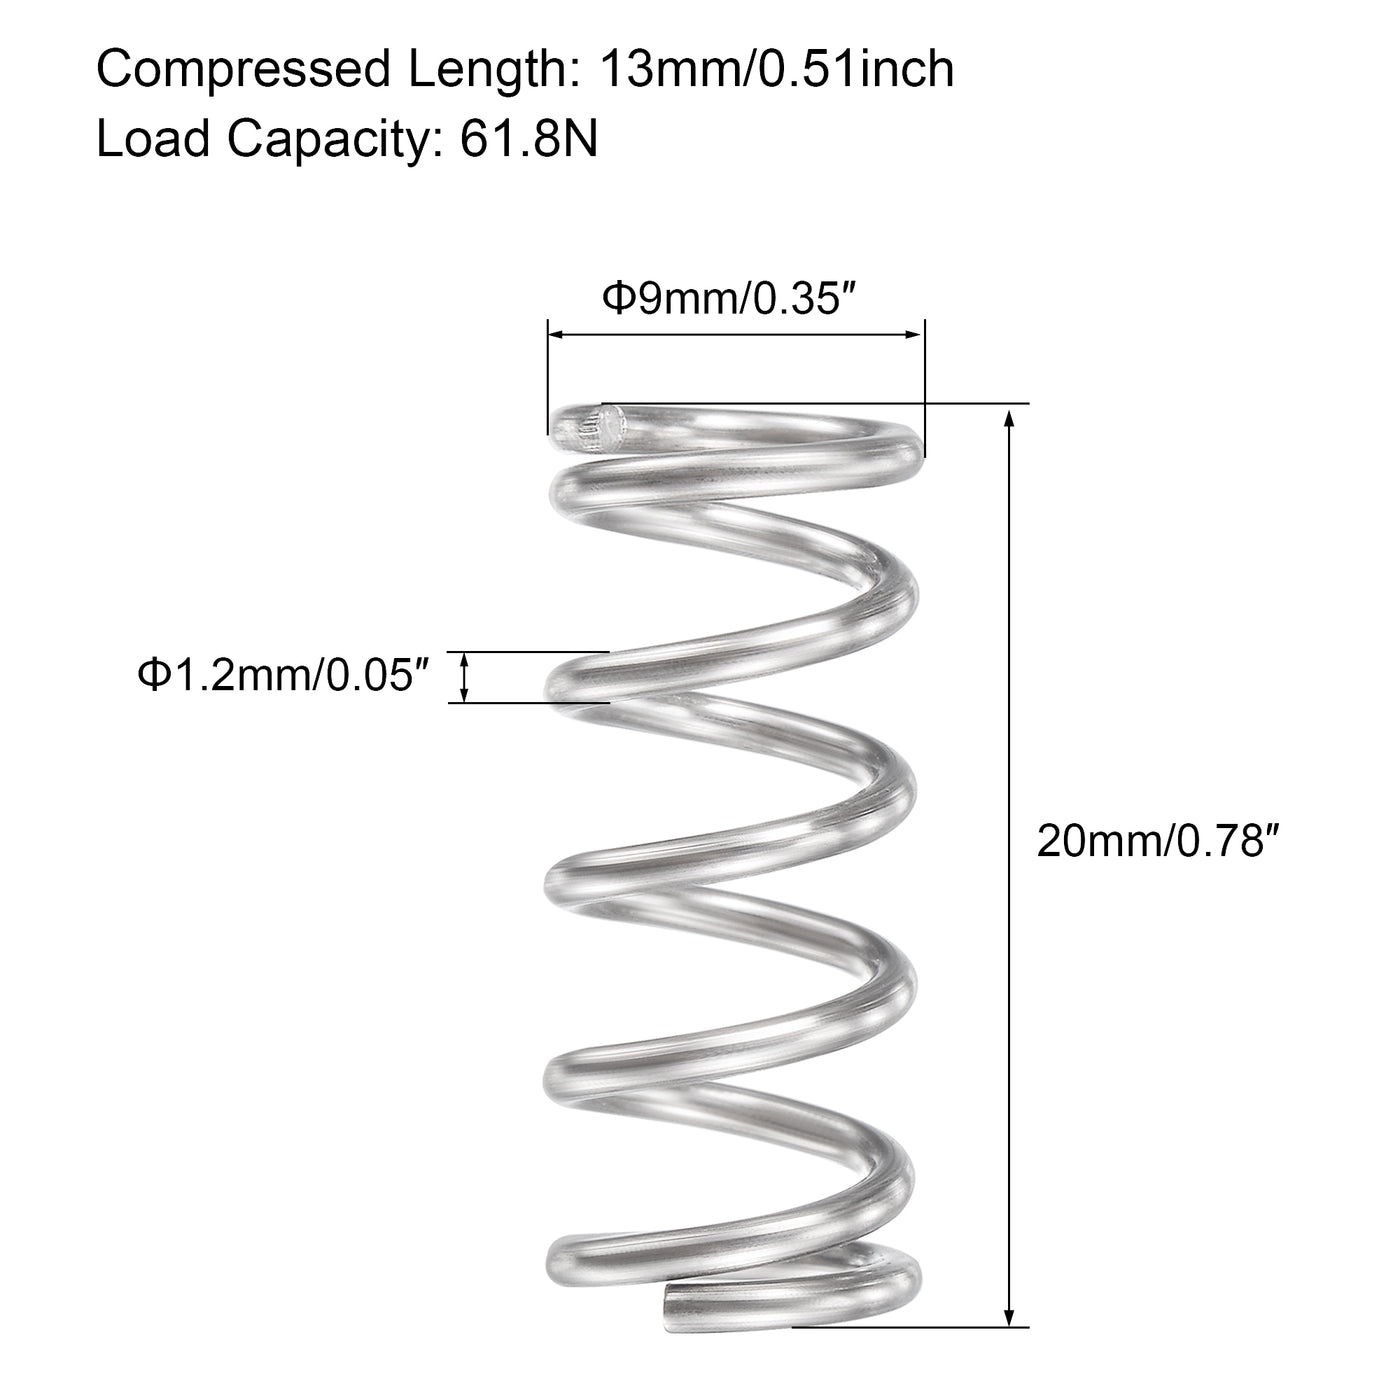 uxcell Uxcell 9mmx1.2mmx20mm 304 Stainless Steel Compression Spring 61.8N Load Capacity 5pcs